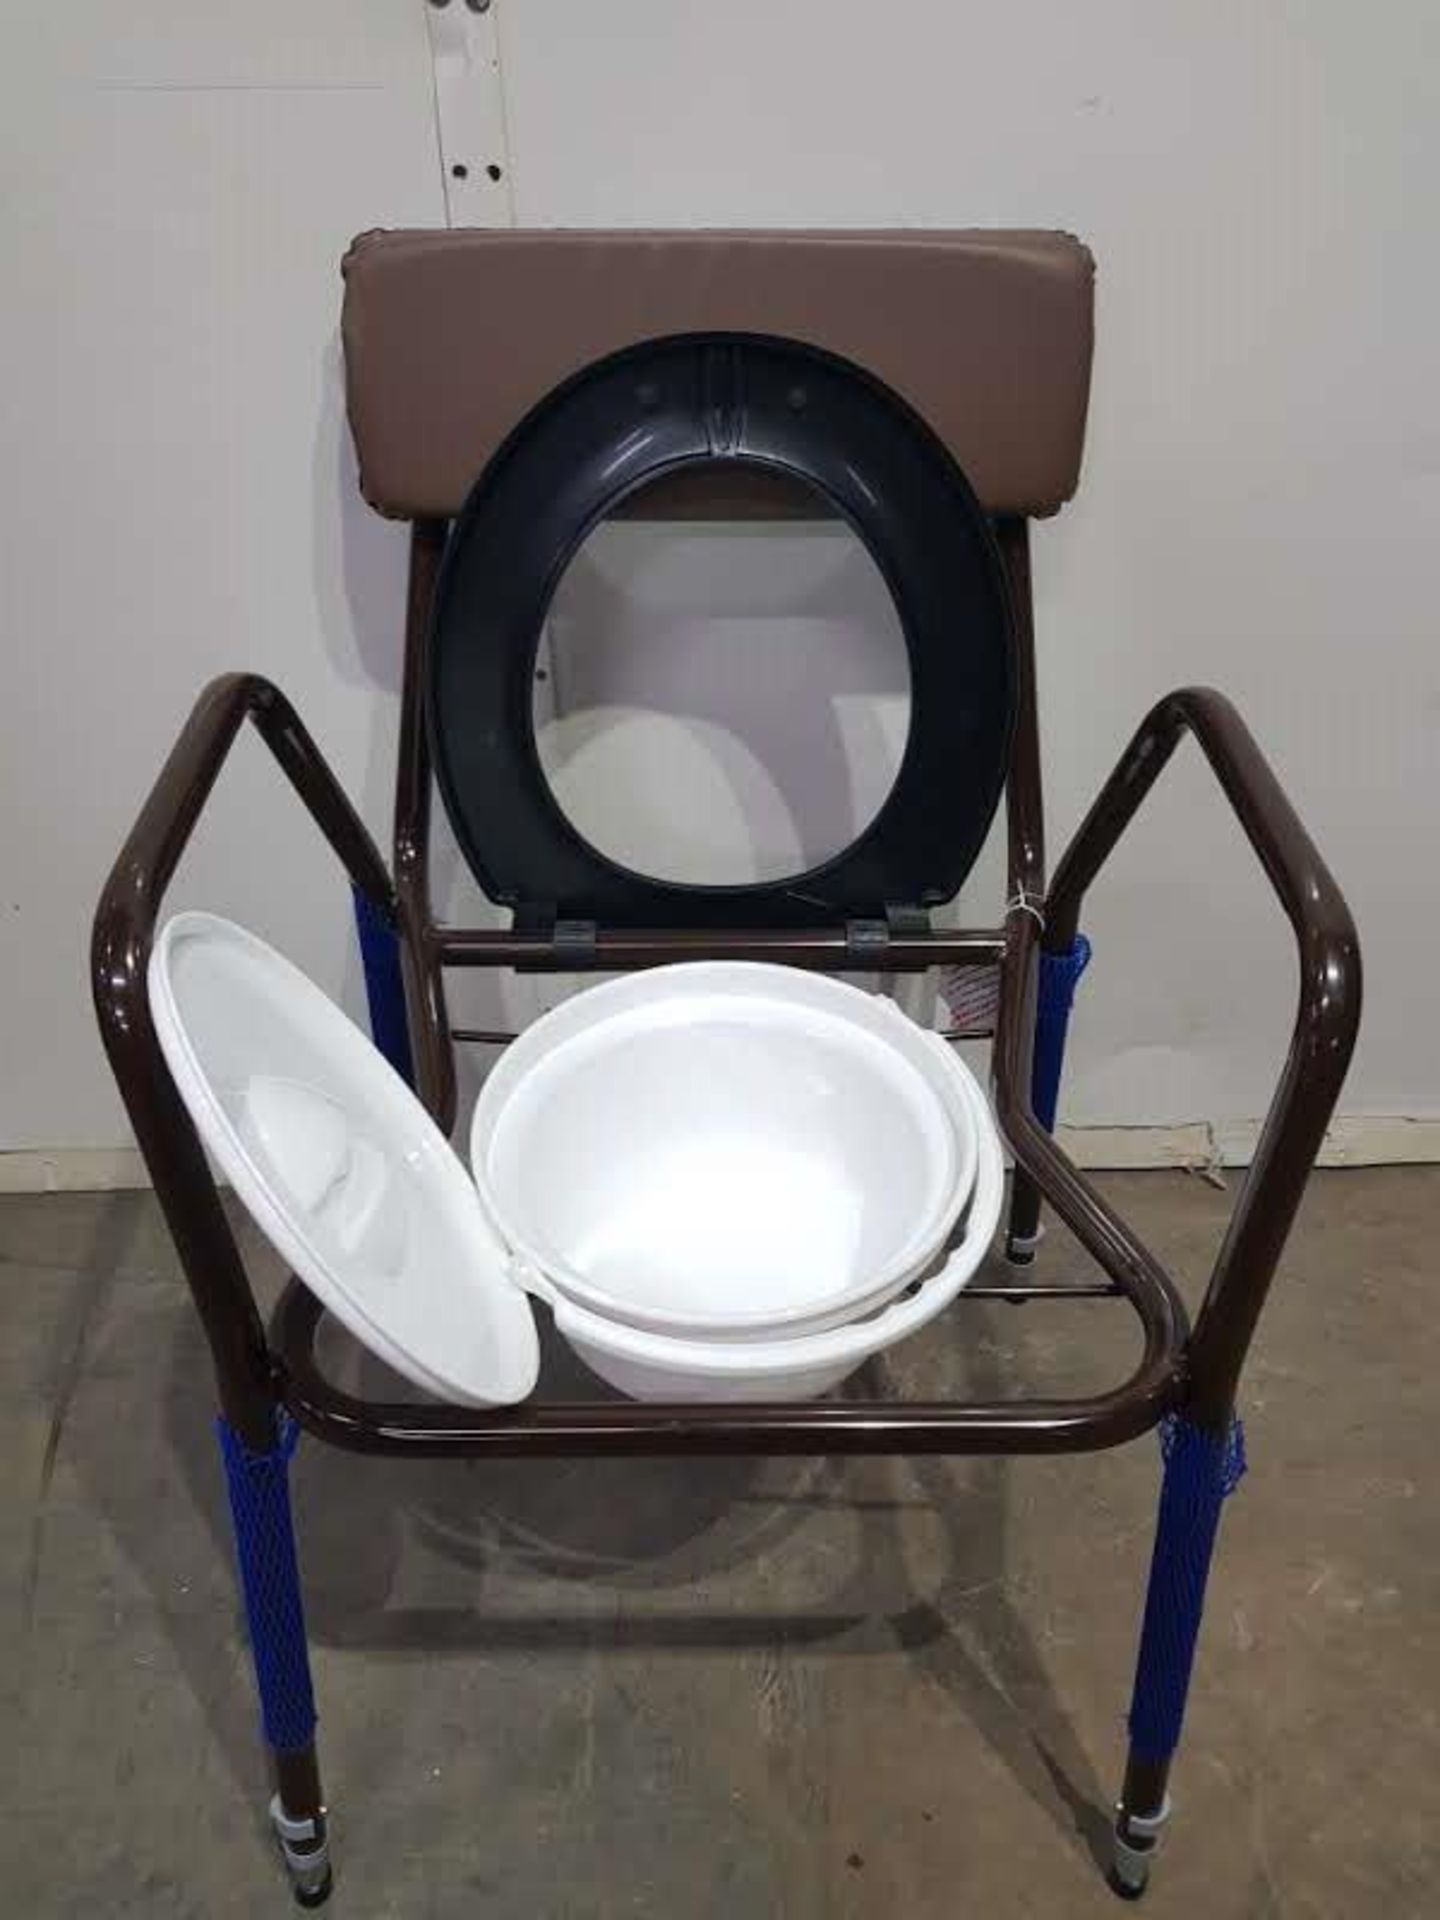 Cefindy Toilet Chair Height Adjustable - Image 2 of 5